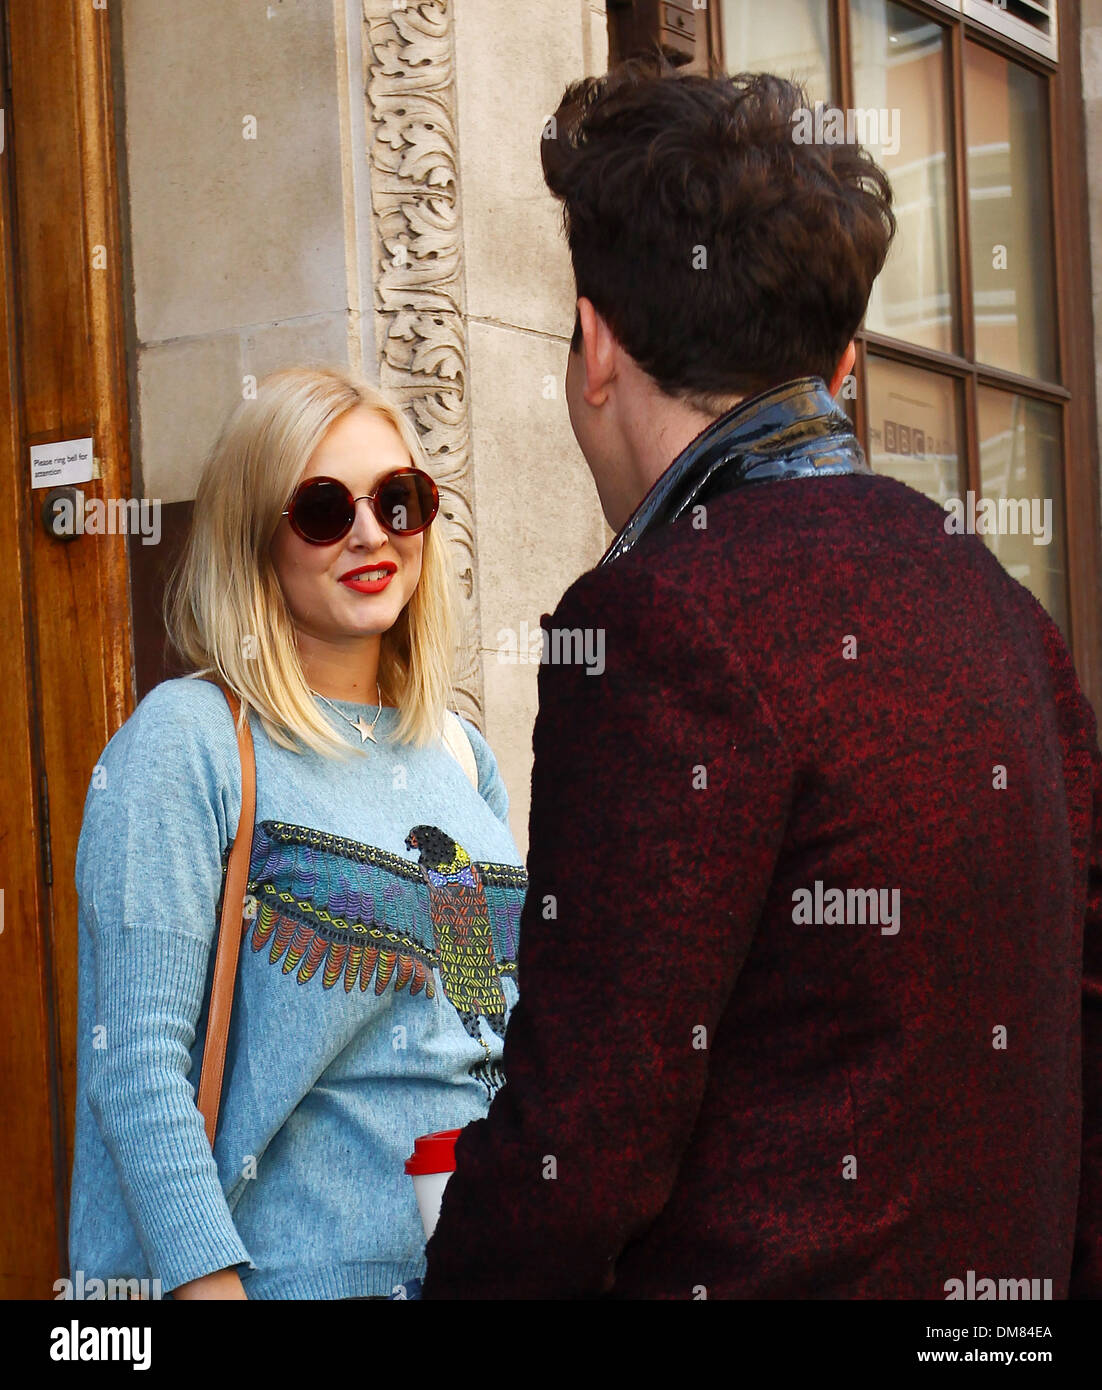 Fearne Cotton and Nick Grimshaw outside the BBC Radio 1 studios London, England - 03.09.12 Stock Photo